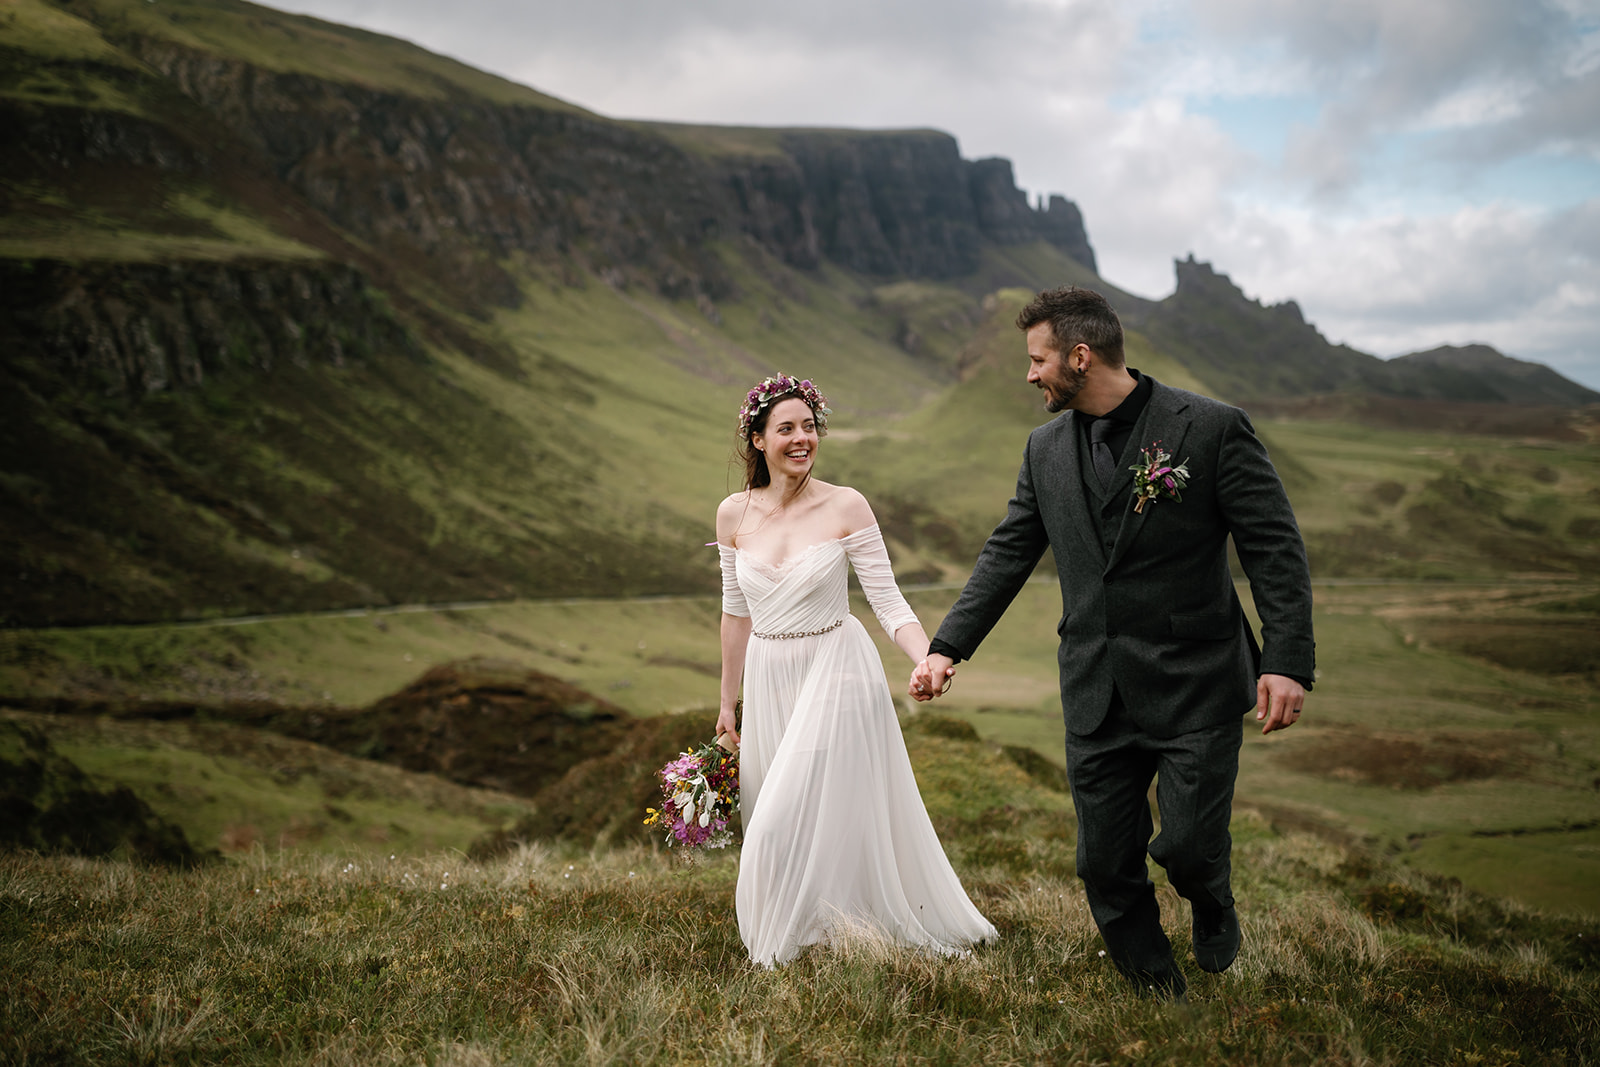 Nick and Becca, hand in hand, traverse the mystical landscape of Quiraing, capturing the essence of their elopement day